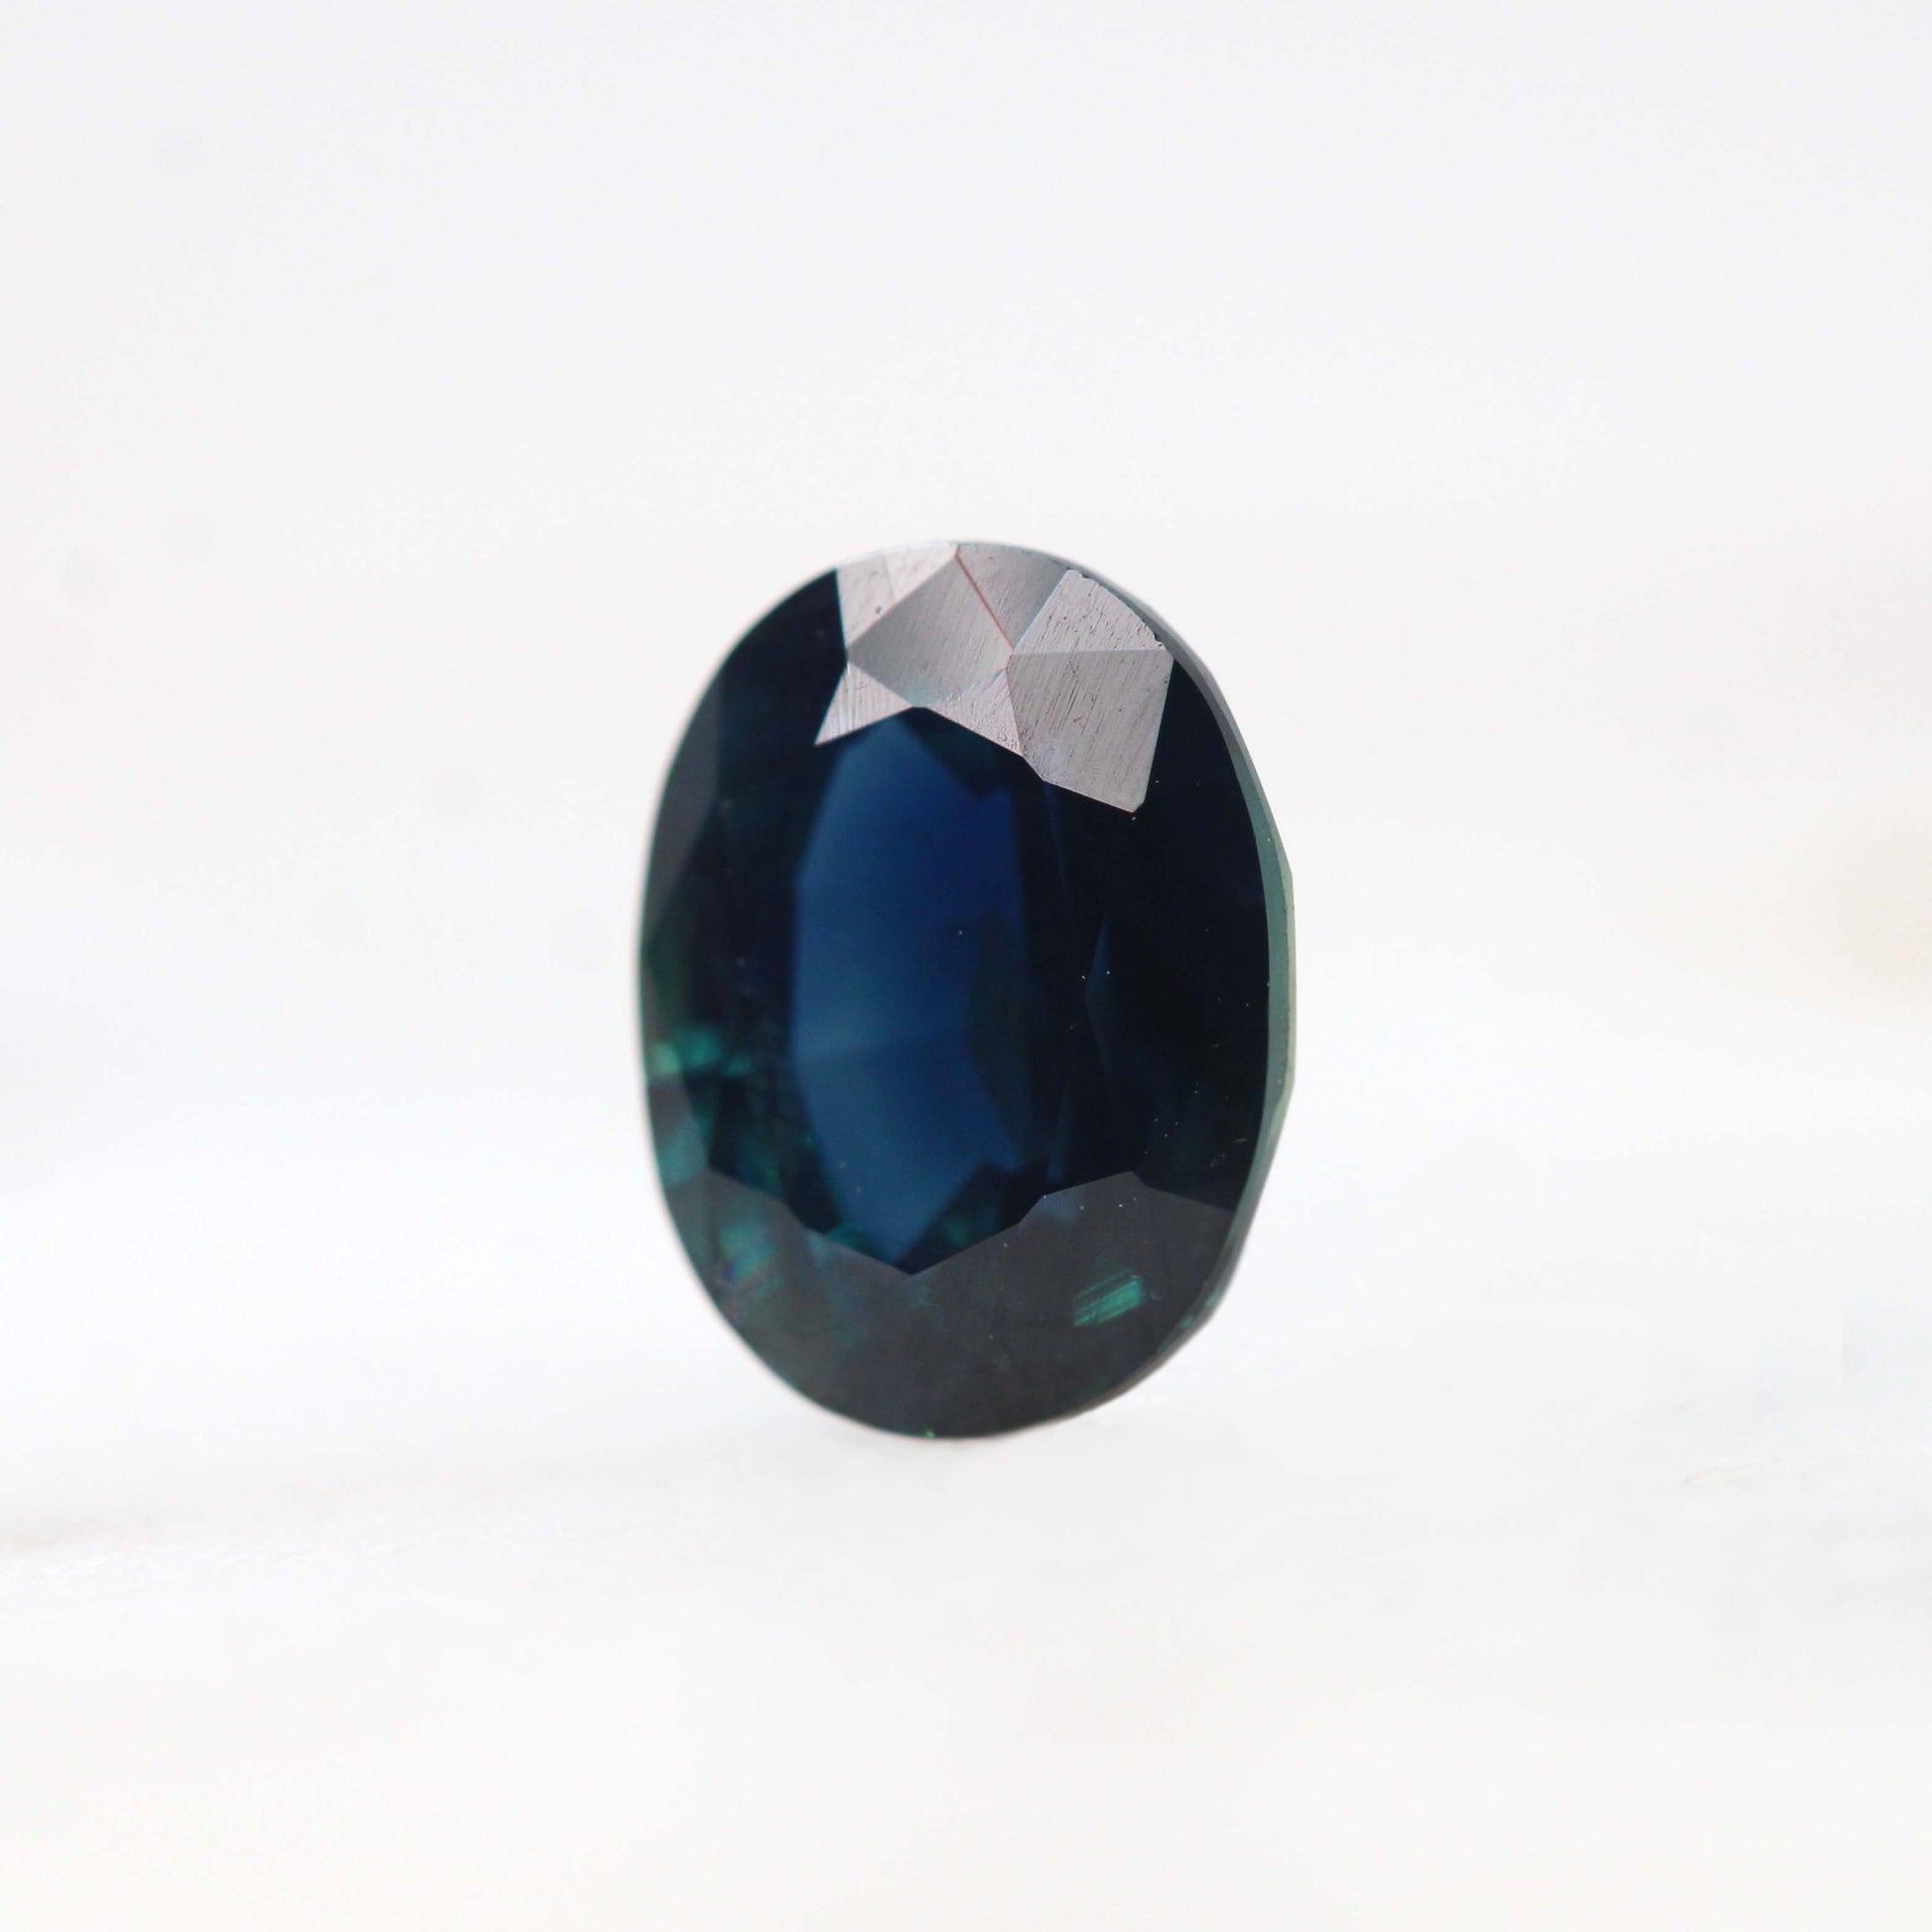 2.03 Carat Dark Teal Oval Sapphire for Custom Work - Inventory Code DTOS203 - Midwinter Co. Alternative Bridal Rings and Modern Fine Jewelry